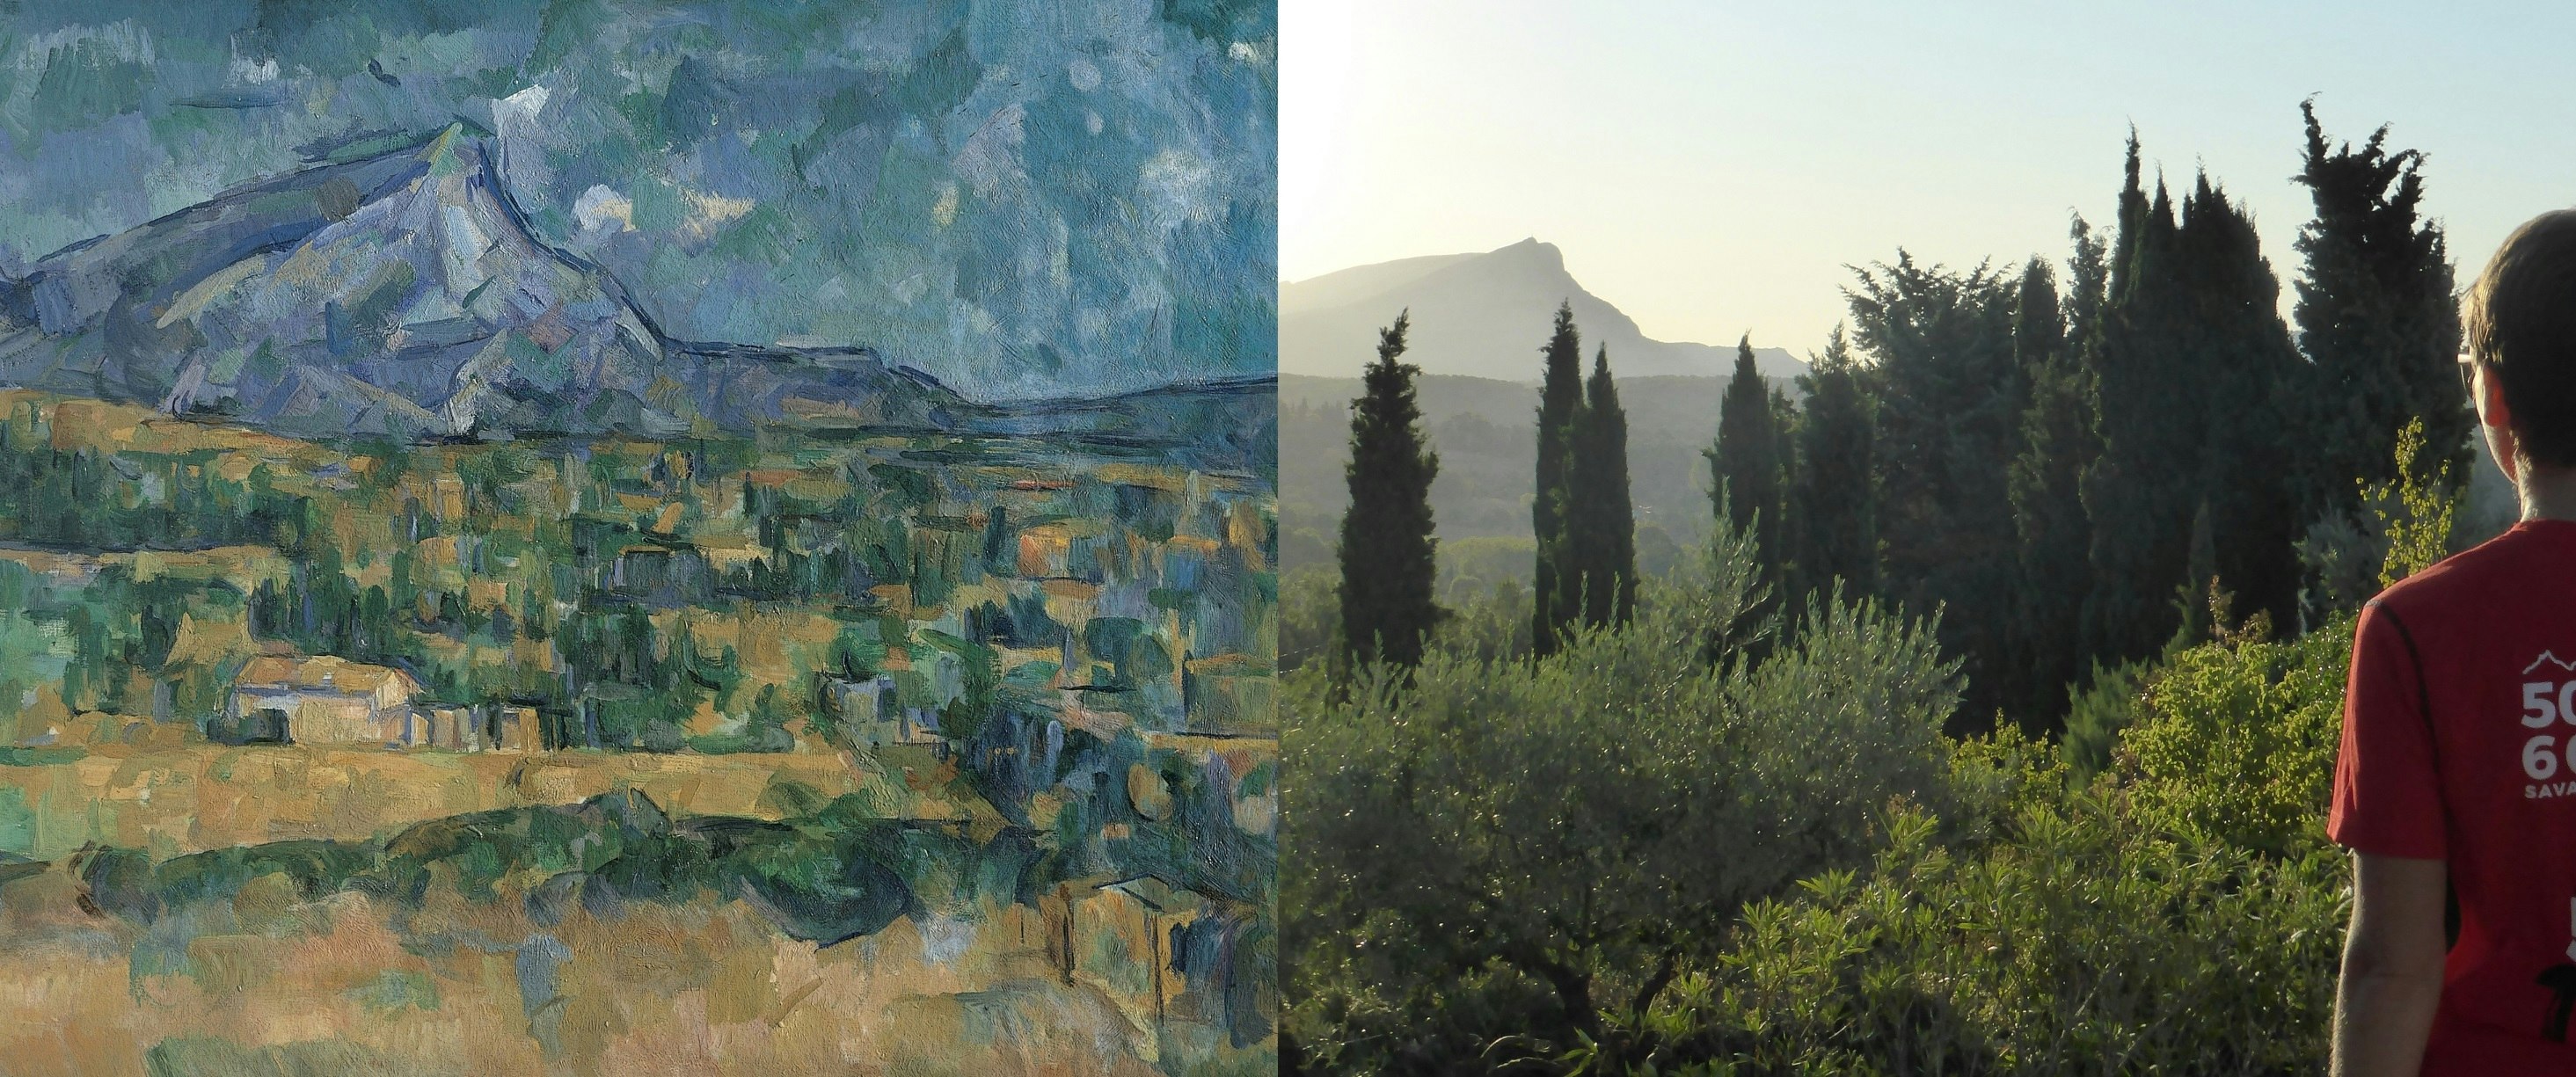 A painting of Mont Sainte Victoire by Paul Cézanne; the pyramid-like mountain rises in the top left-hand corner, with tree covered hills in the foreground. On the right is a photograph of a similar view, with the writer standing in the far right side.